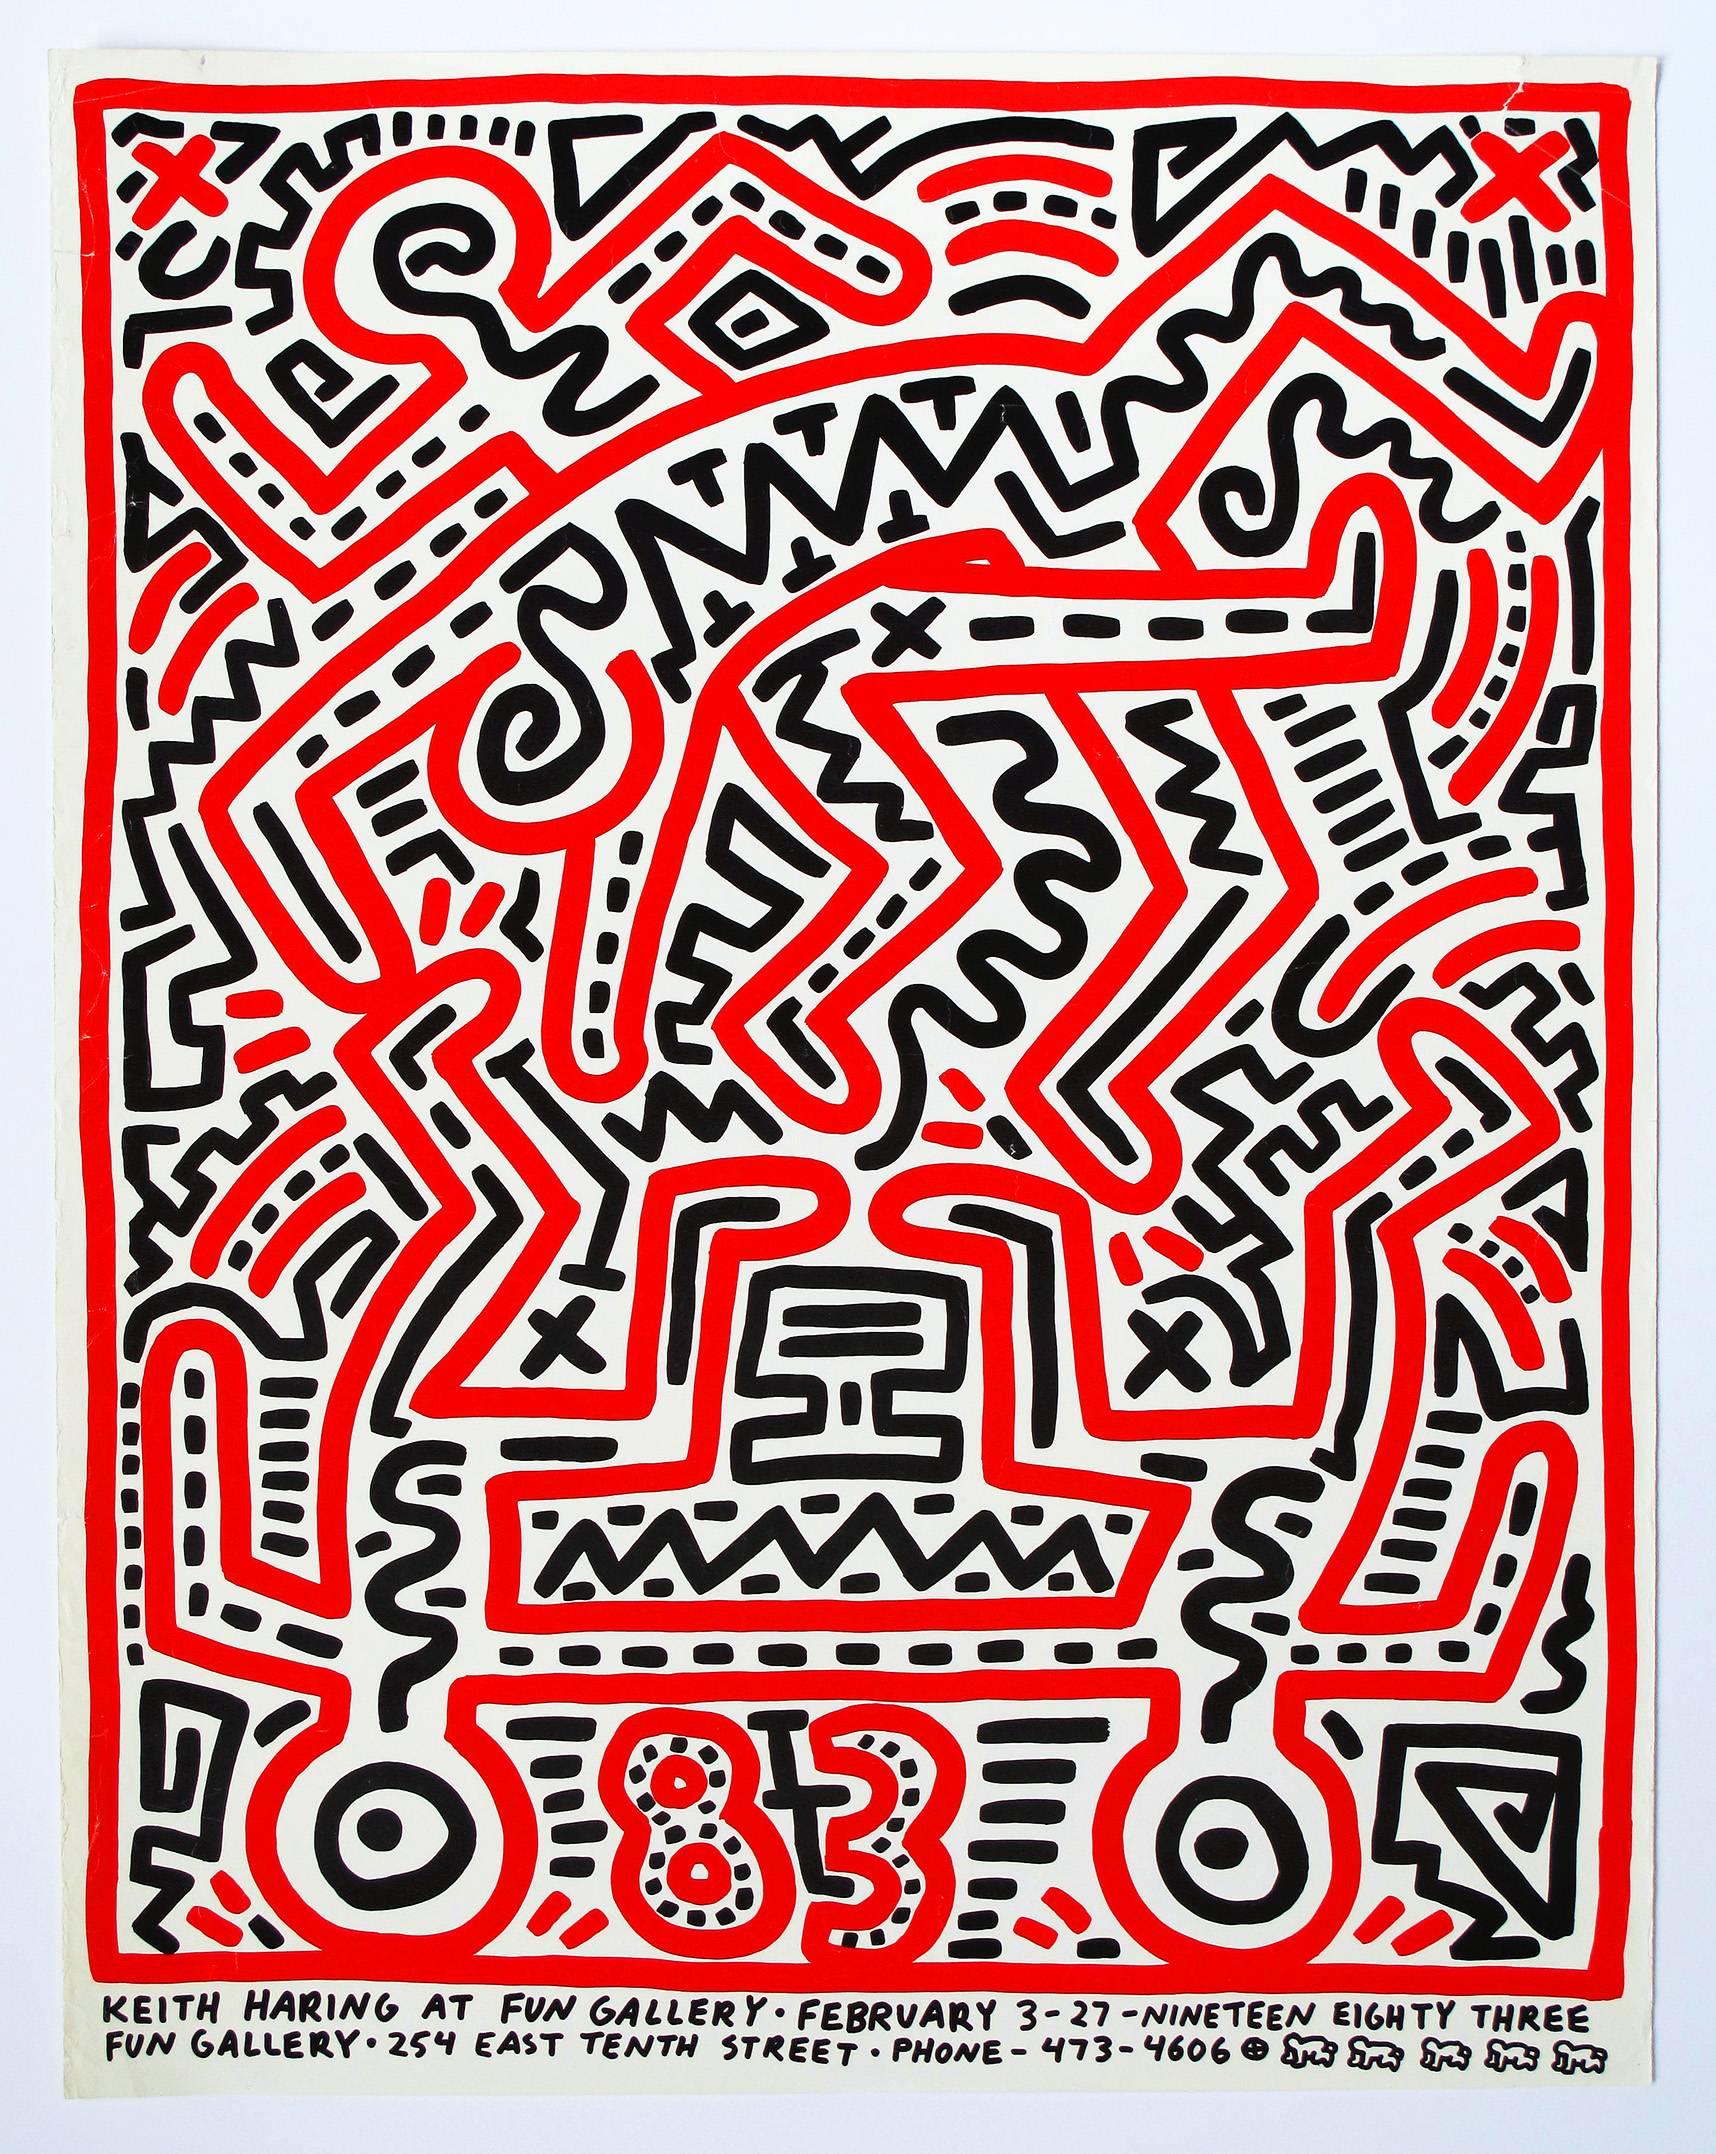 Fun Gallery Exhibition Poster - Pop Art Print by Keith Haring